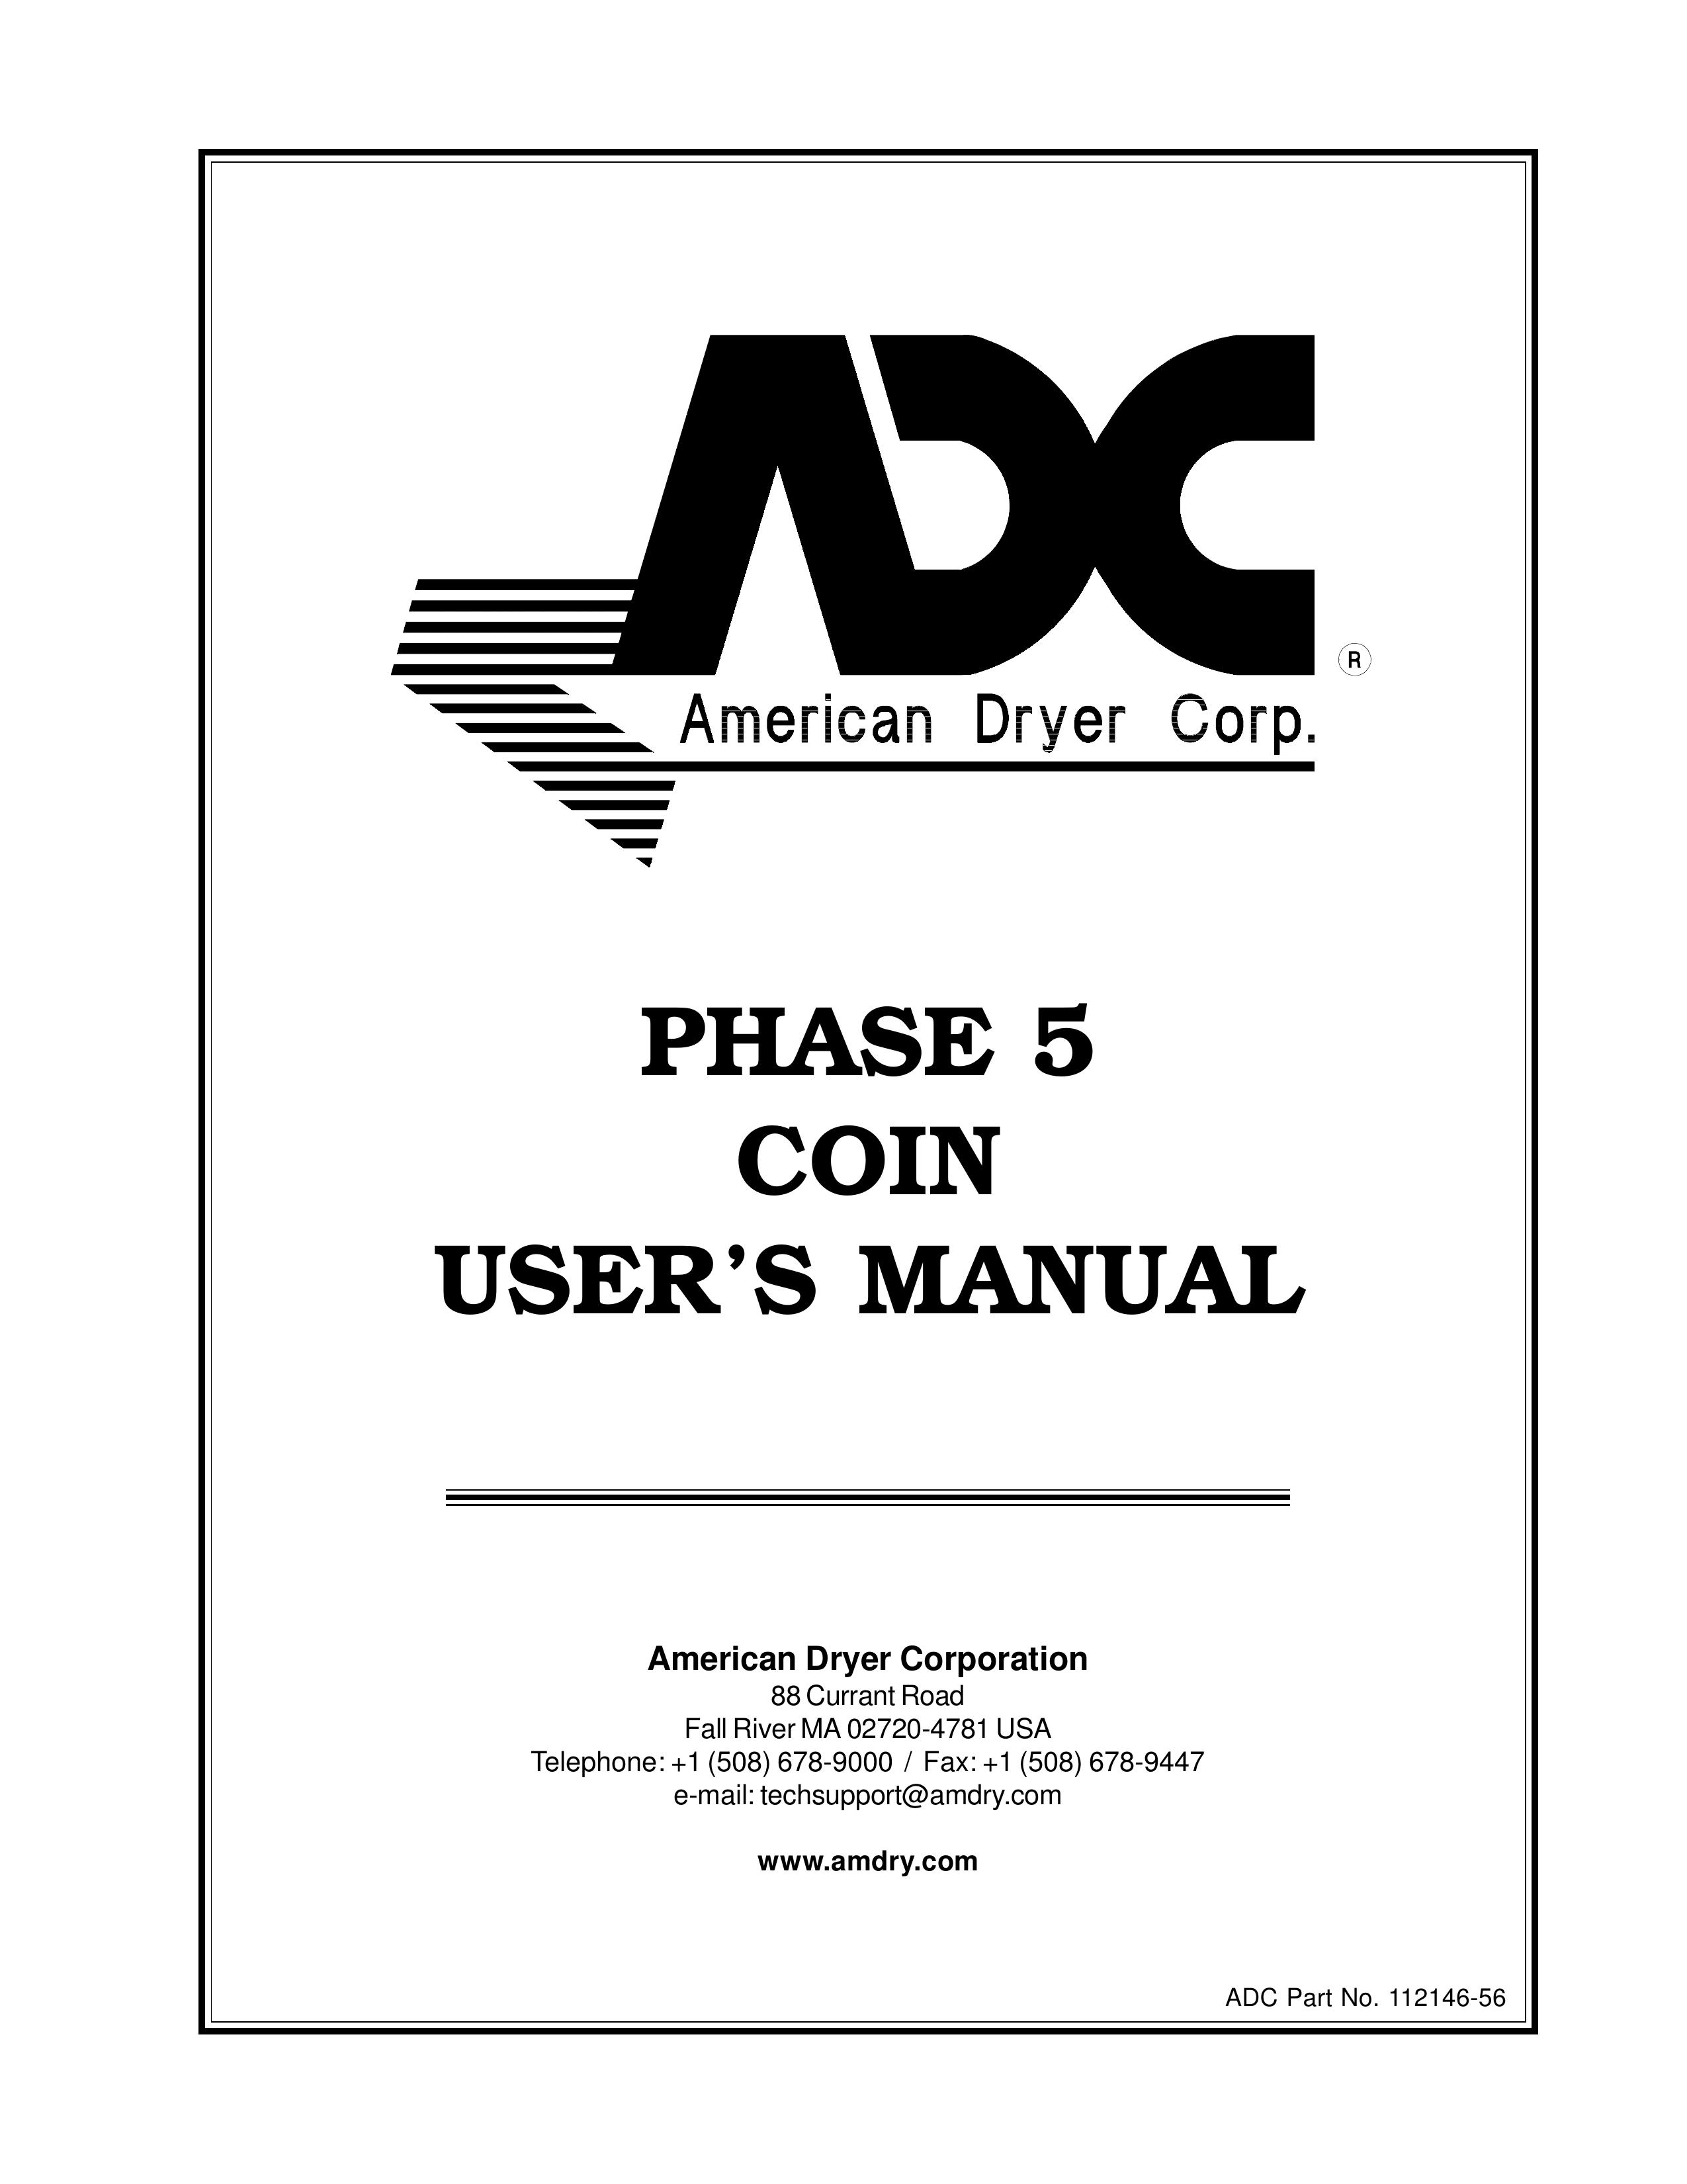 ADC AD-26 Clothes Dryer User Manual (Page 1)